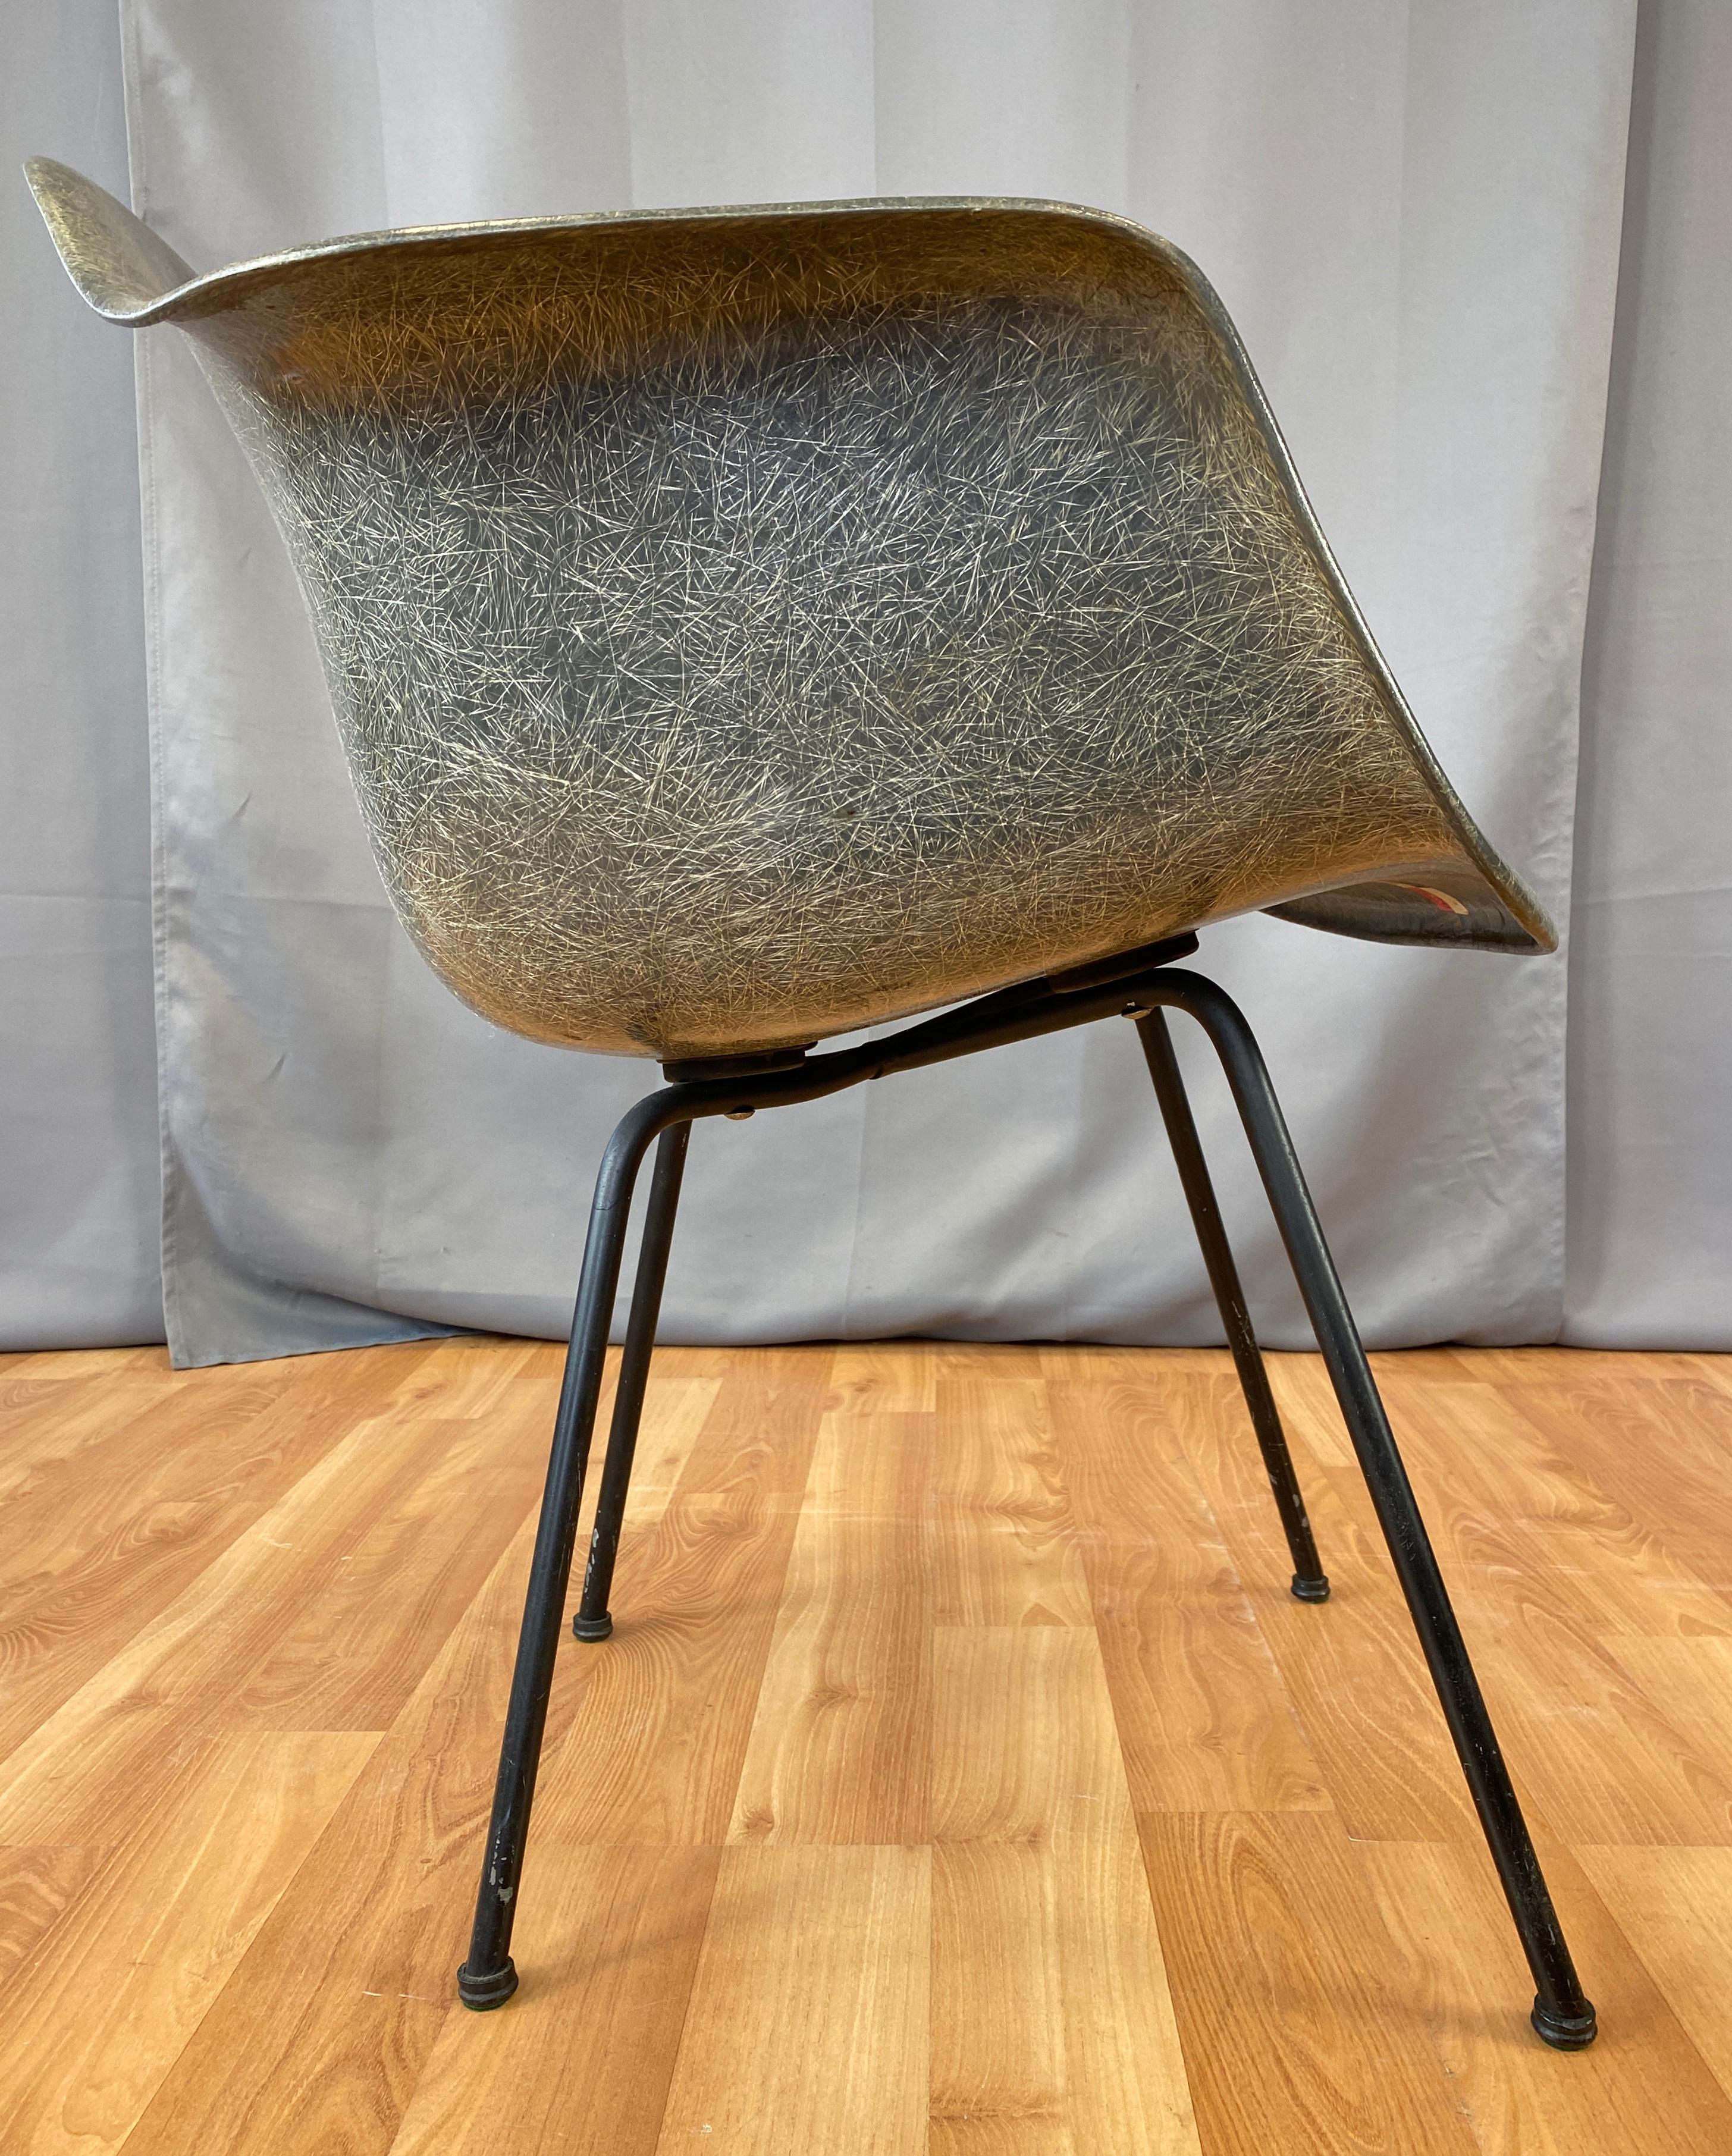 Mid-20th Century 1st Generation Zenith Plastic Rope Edge Chair, Charles Eames for Herman Miller B